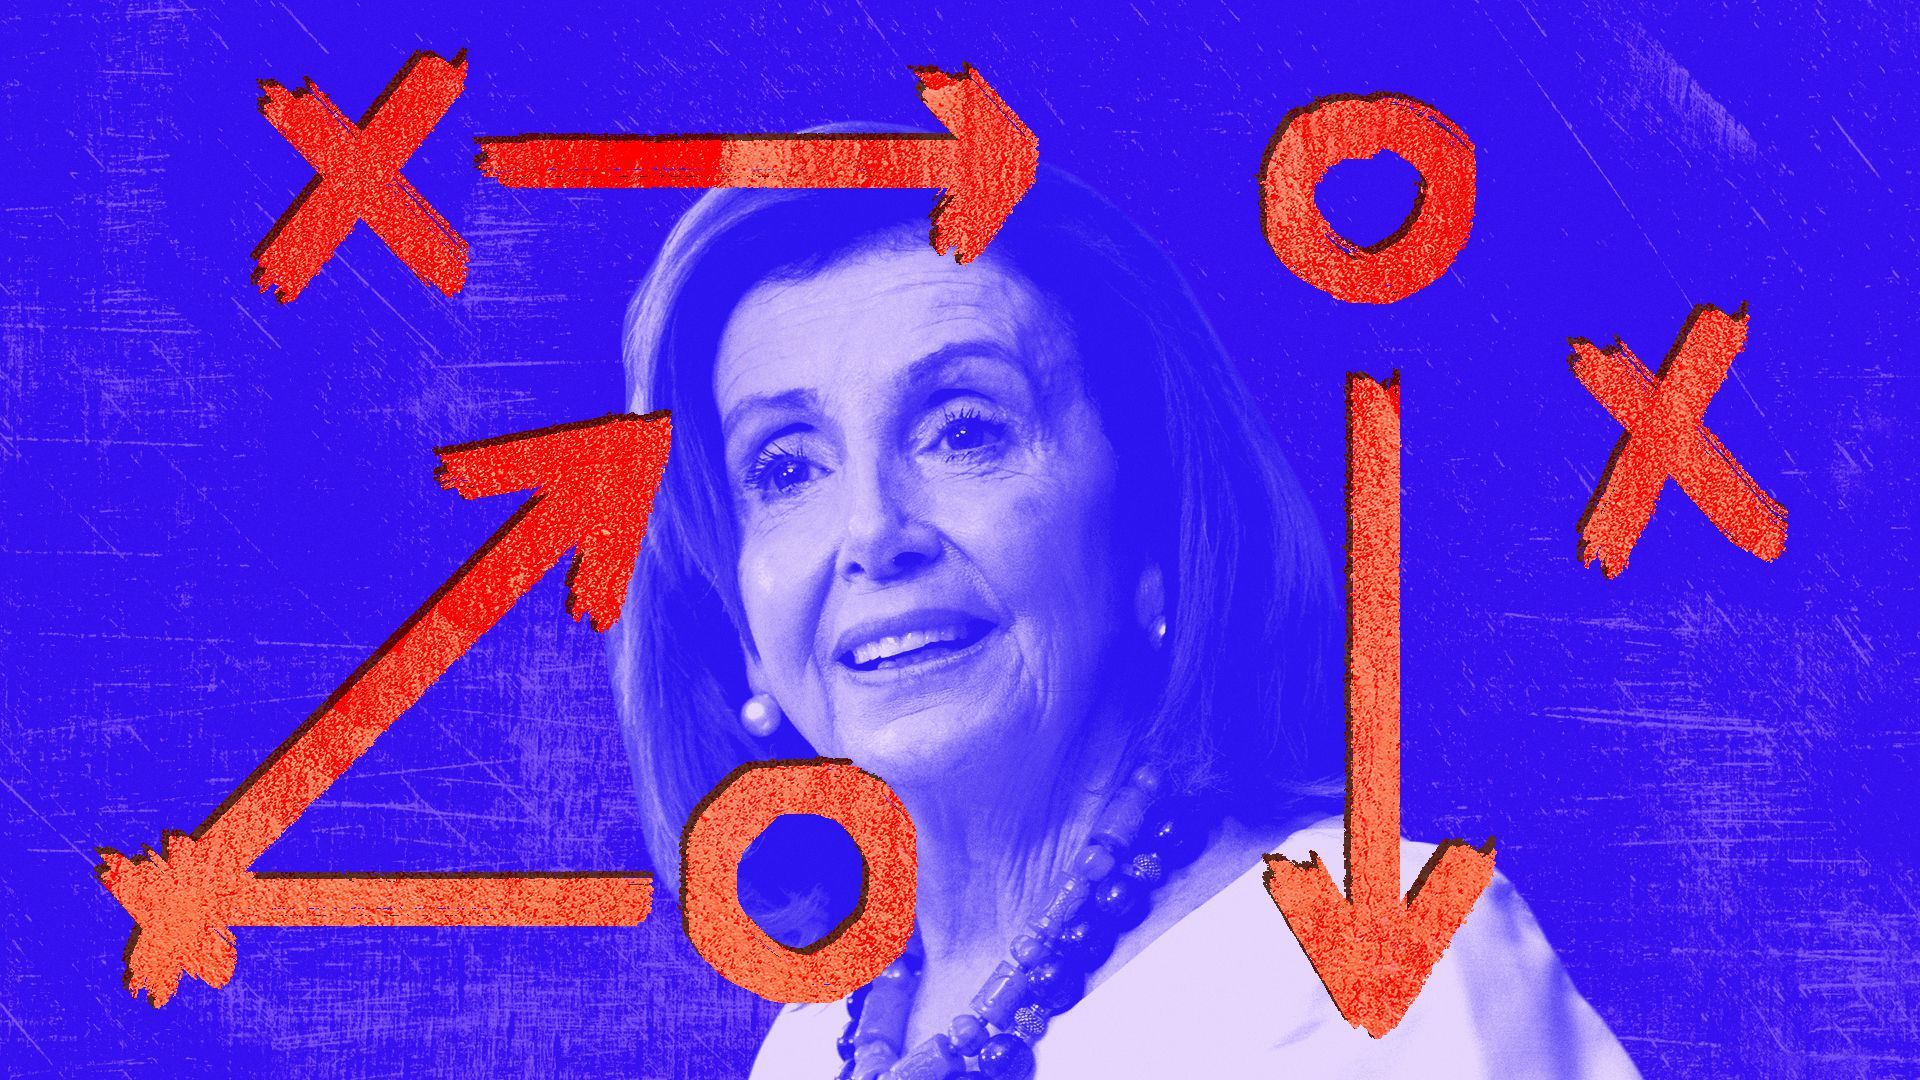 An illustration shows House Speaker Nancy Pelosi surrounded by Xs and Os.